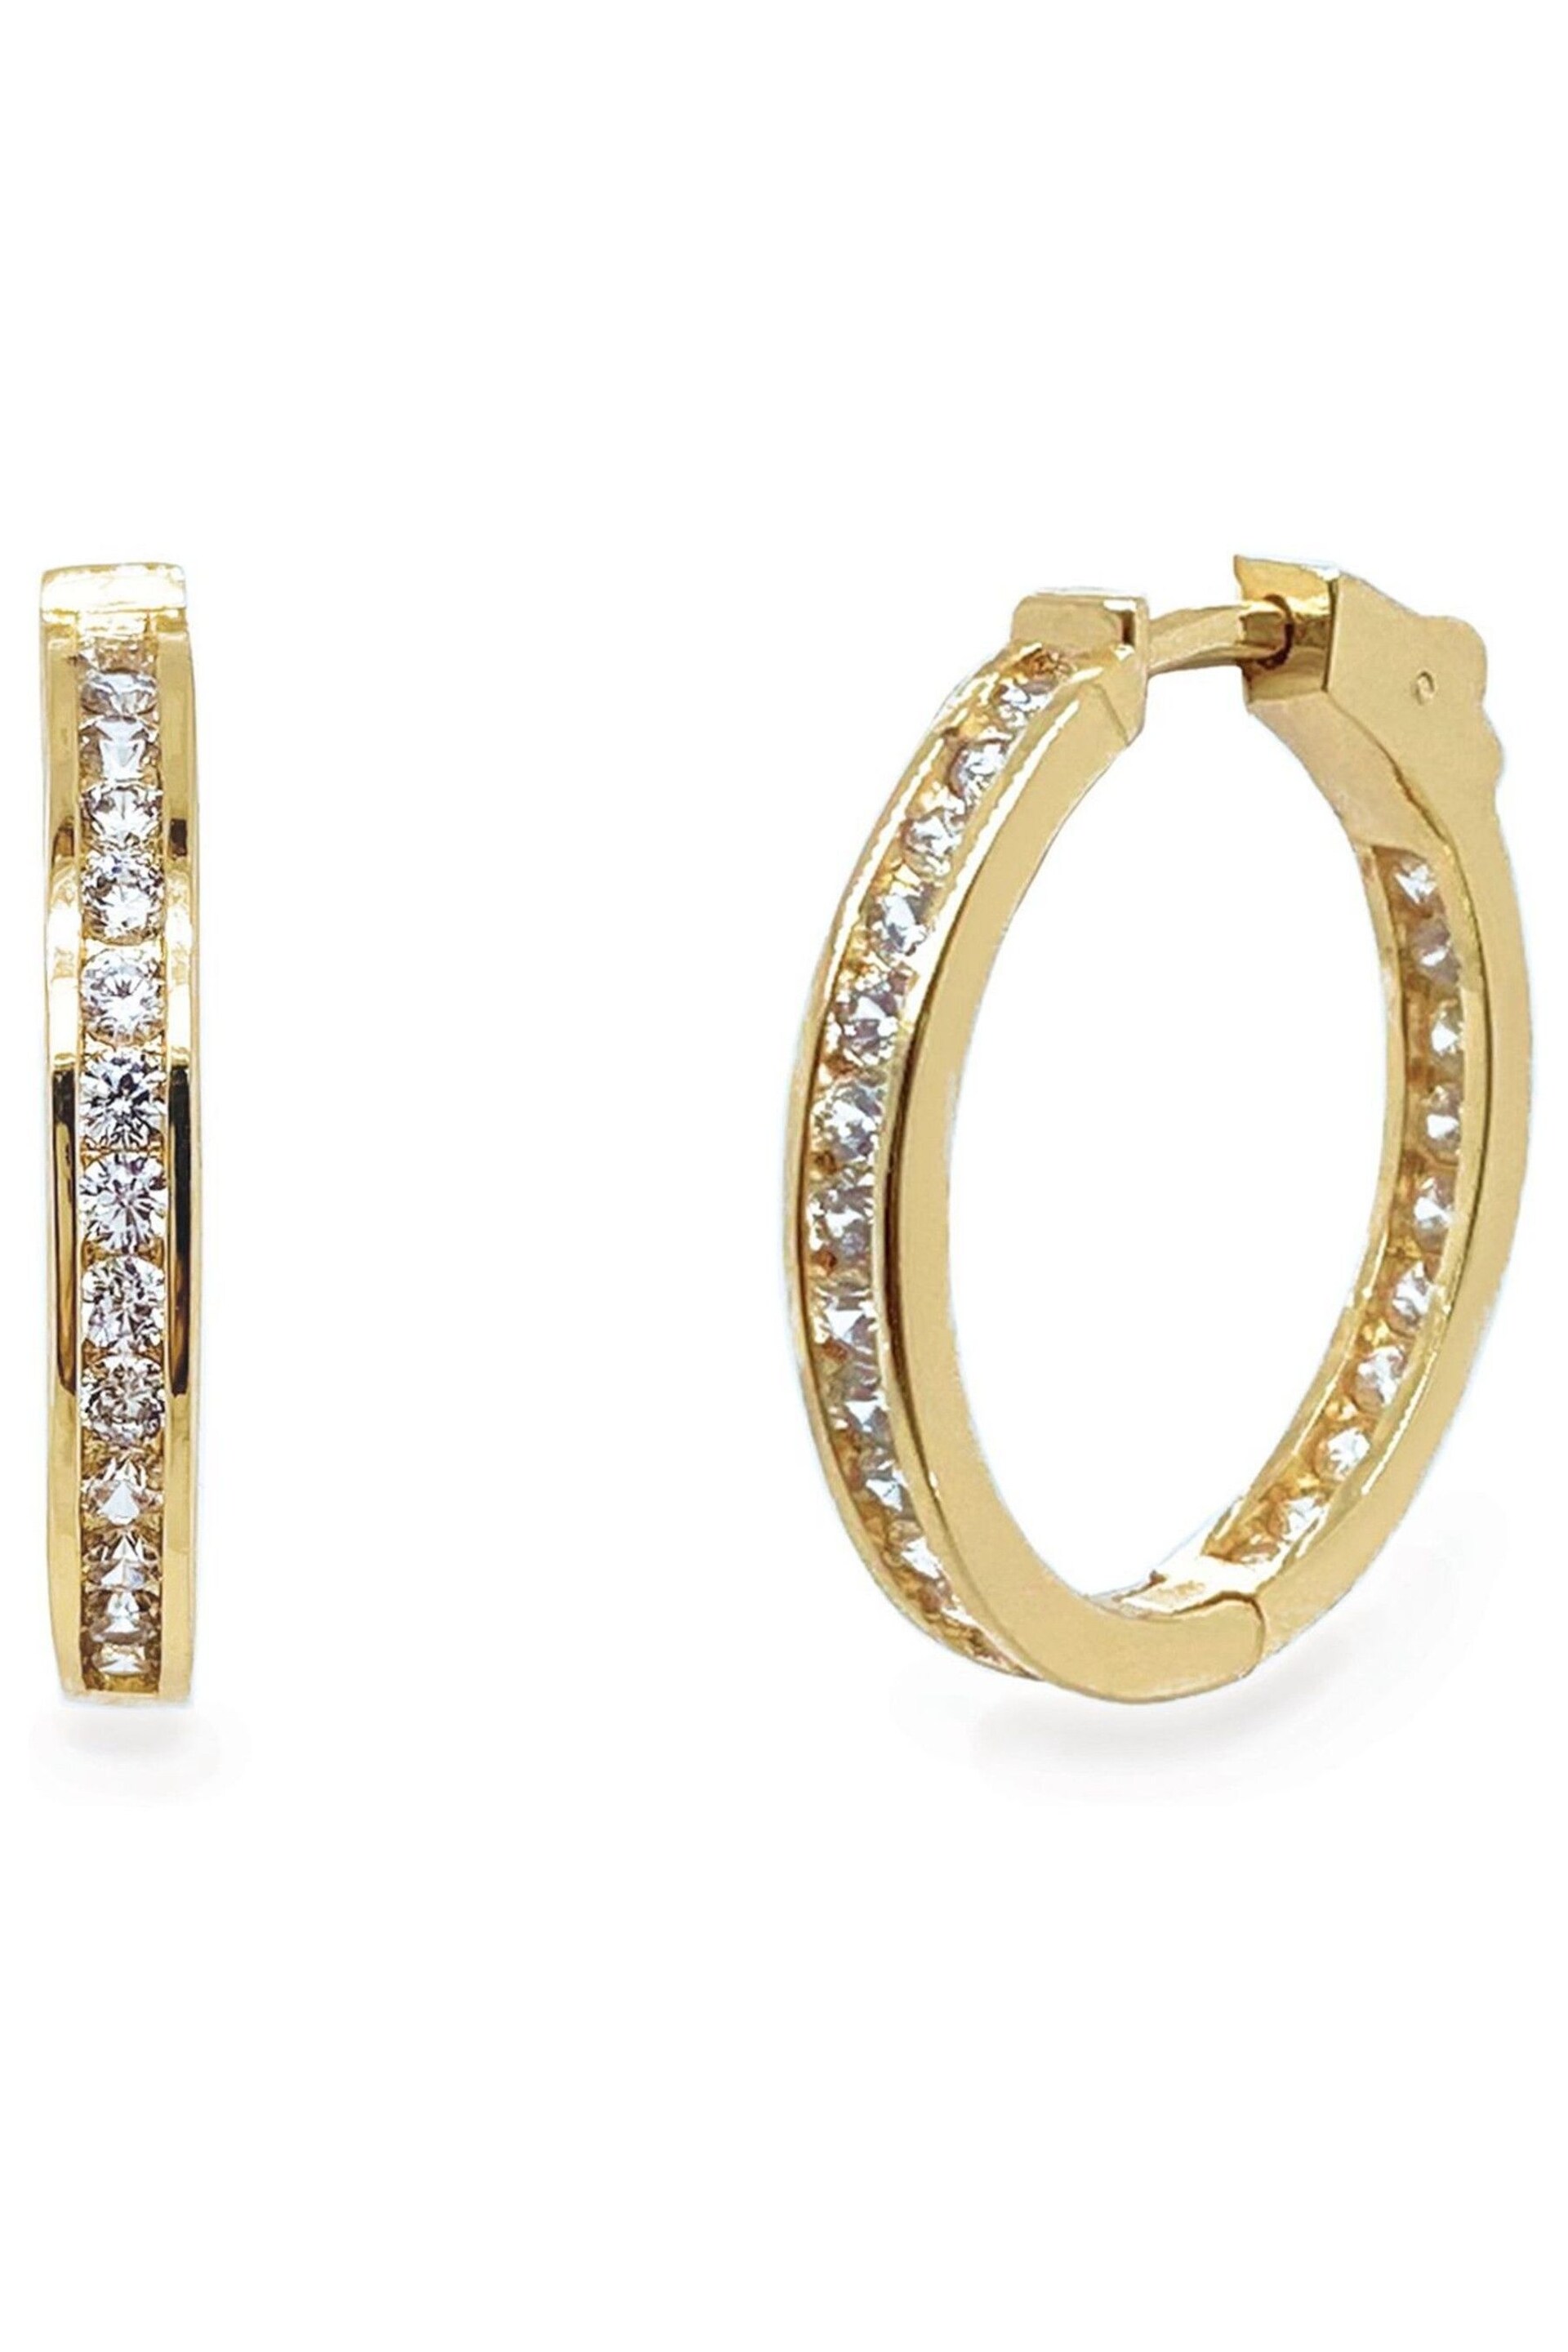 Ivory & Co Gold Copenhagen And Crystal Hoop Earrings - Image 1 of 5